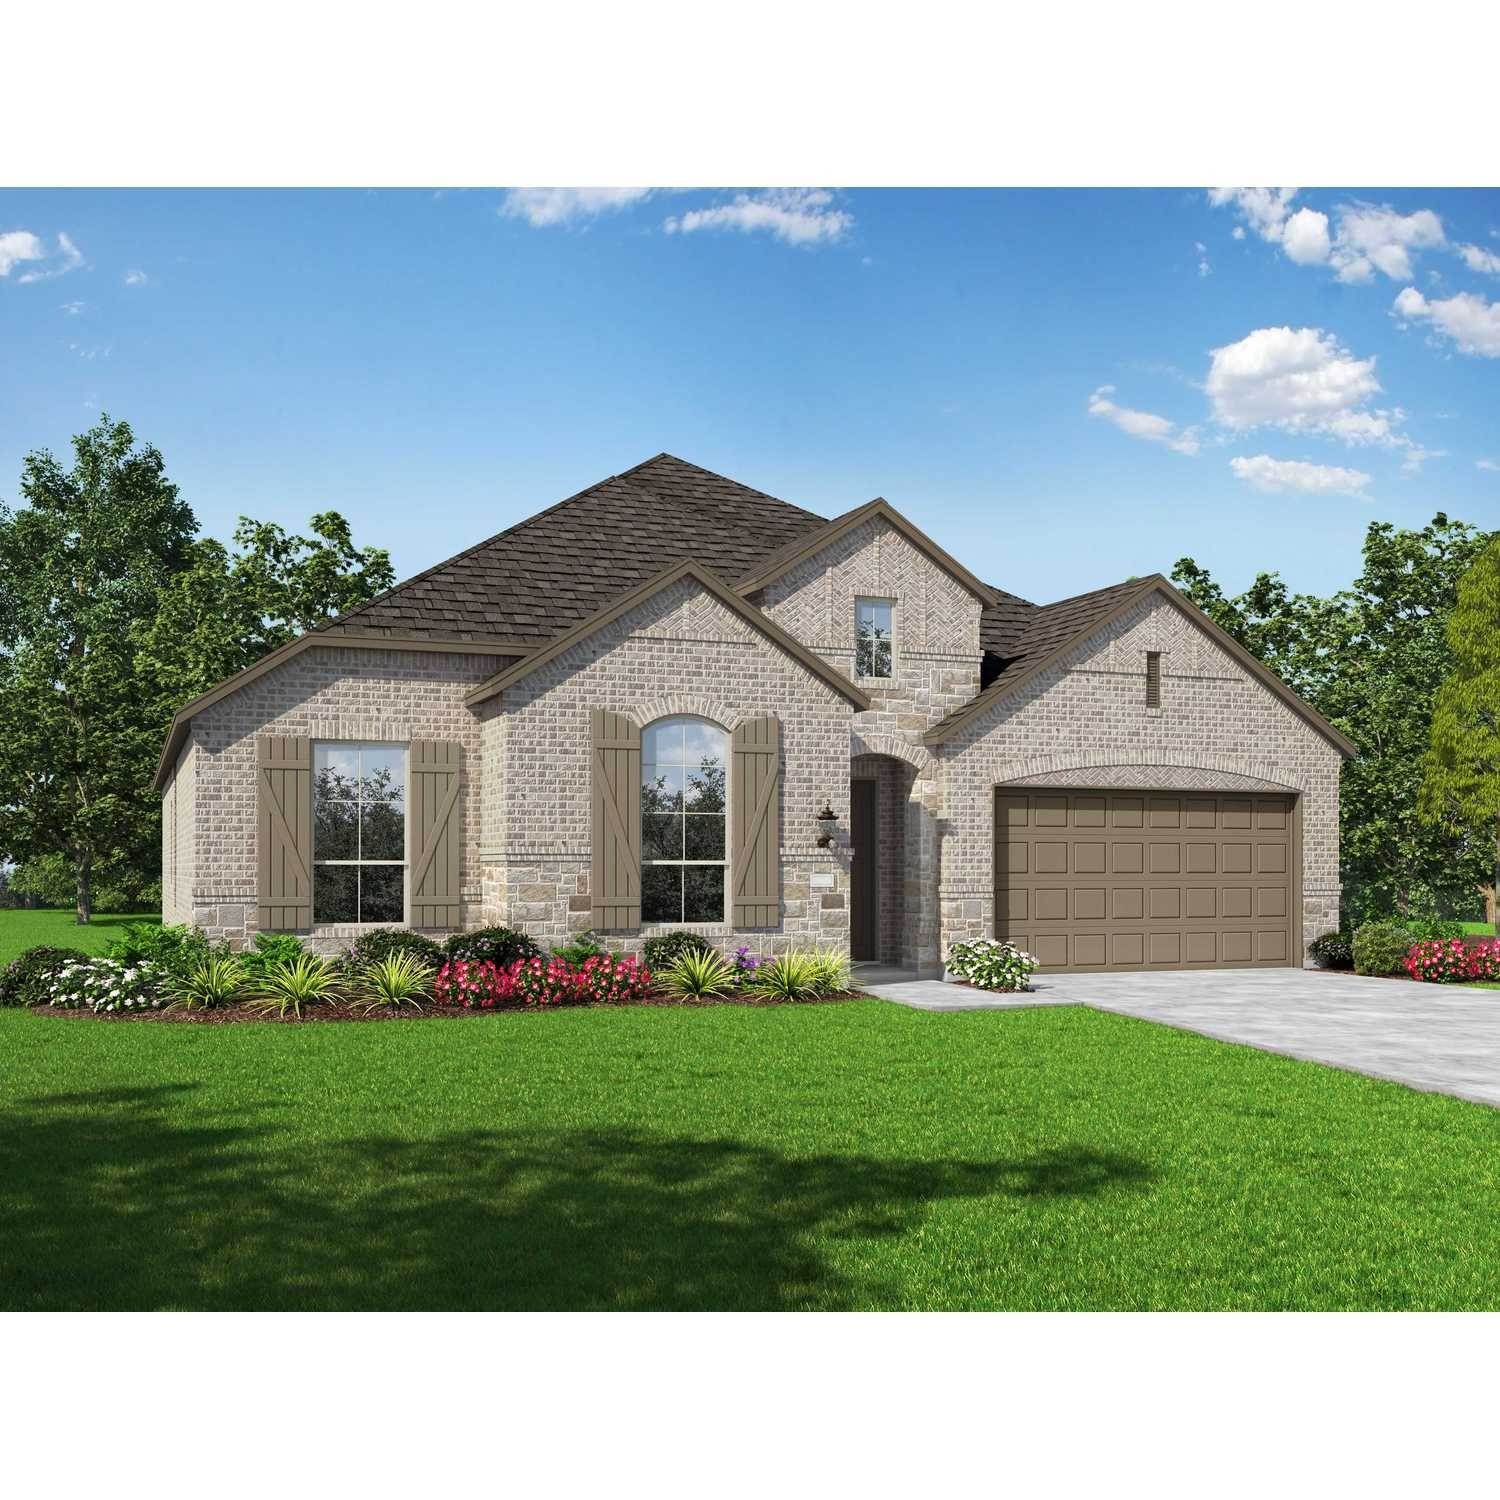 Single Family for Sale at Monterra: 70ft. Lots 1018 Monterra Way, Fate, TX 75087